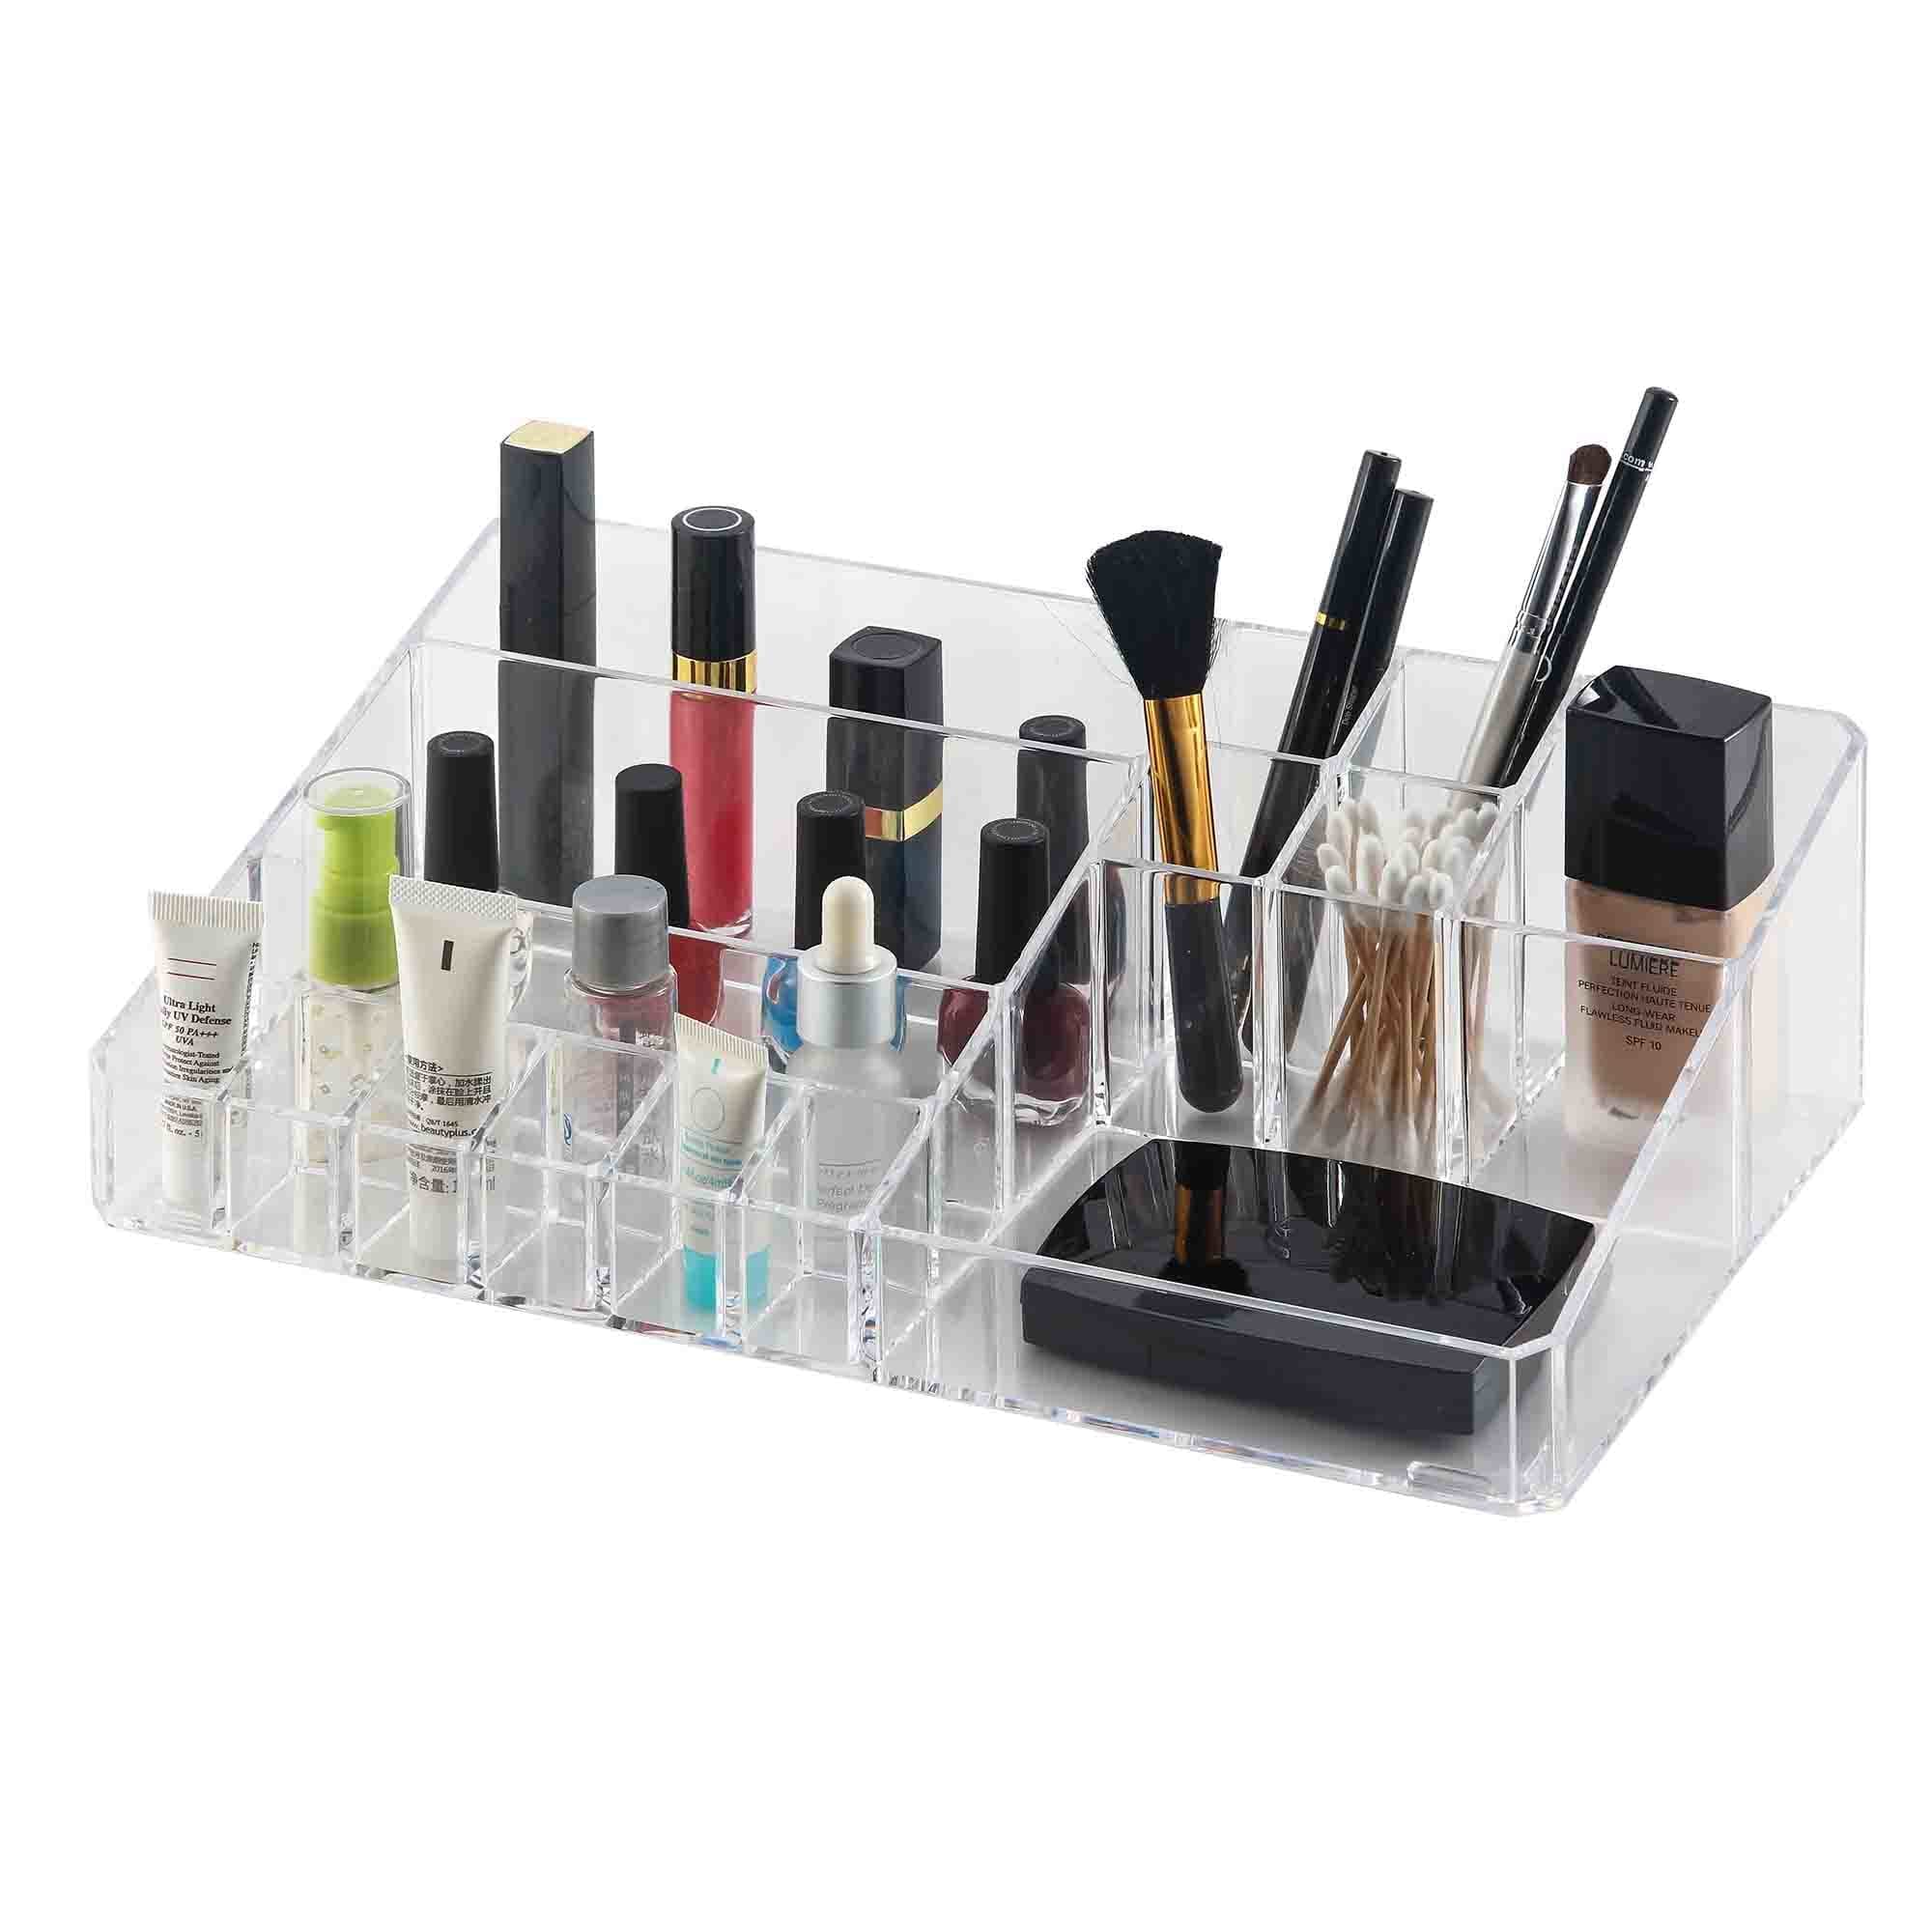 Home Basics Deluxe Make-up Tray $10.00 EACH, CASE PACK OF 6